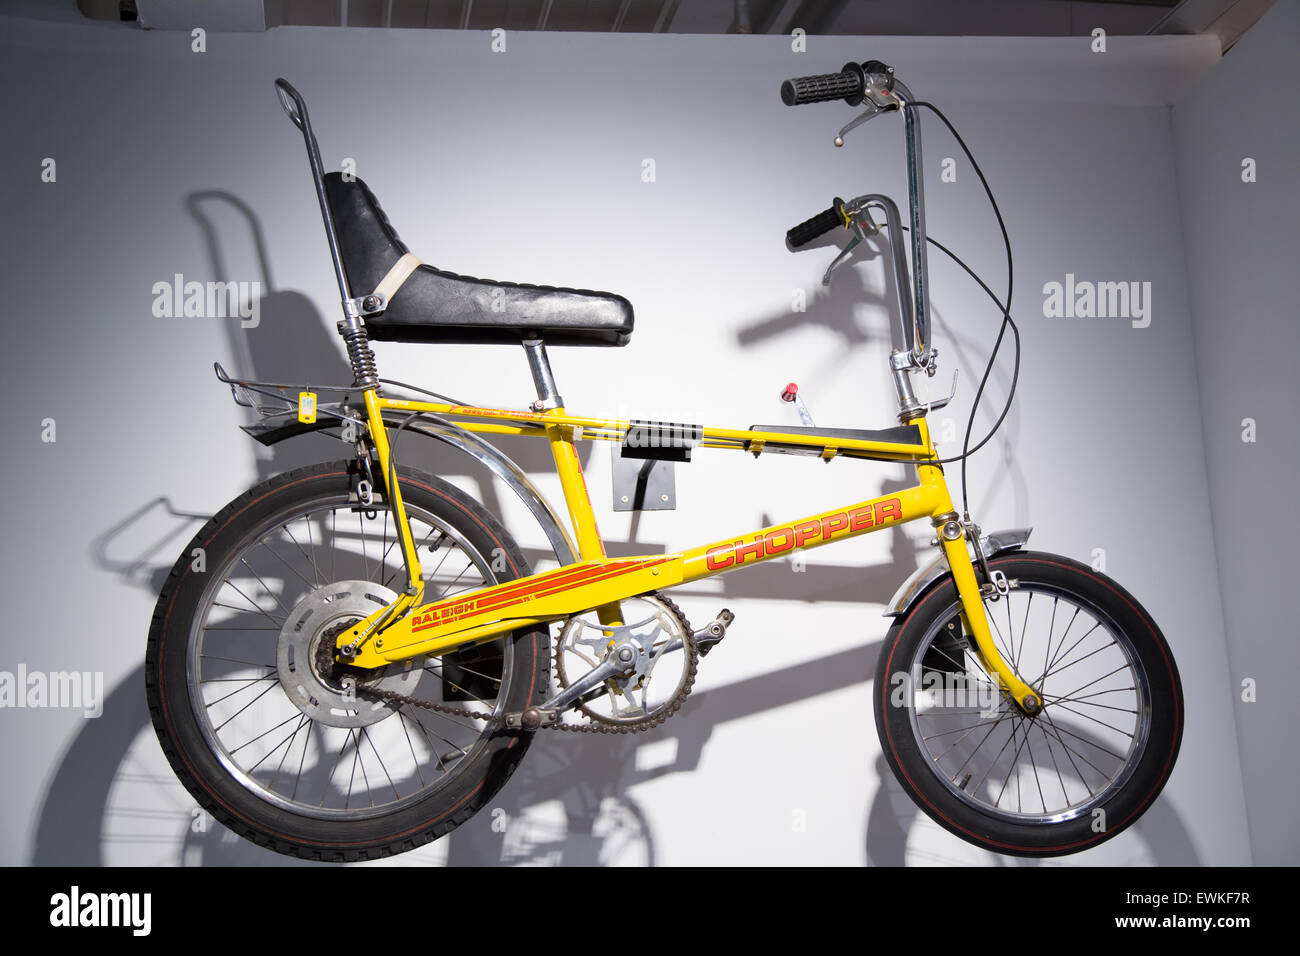 Raleigh Chopper bike vintage retro bicycle at the Coventry Transport Museum Stock Photo